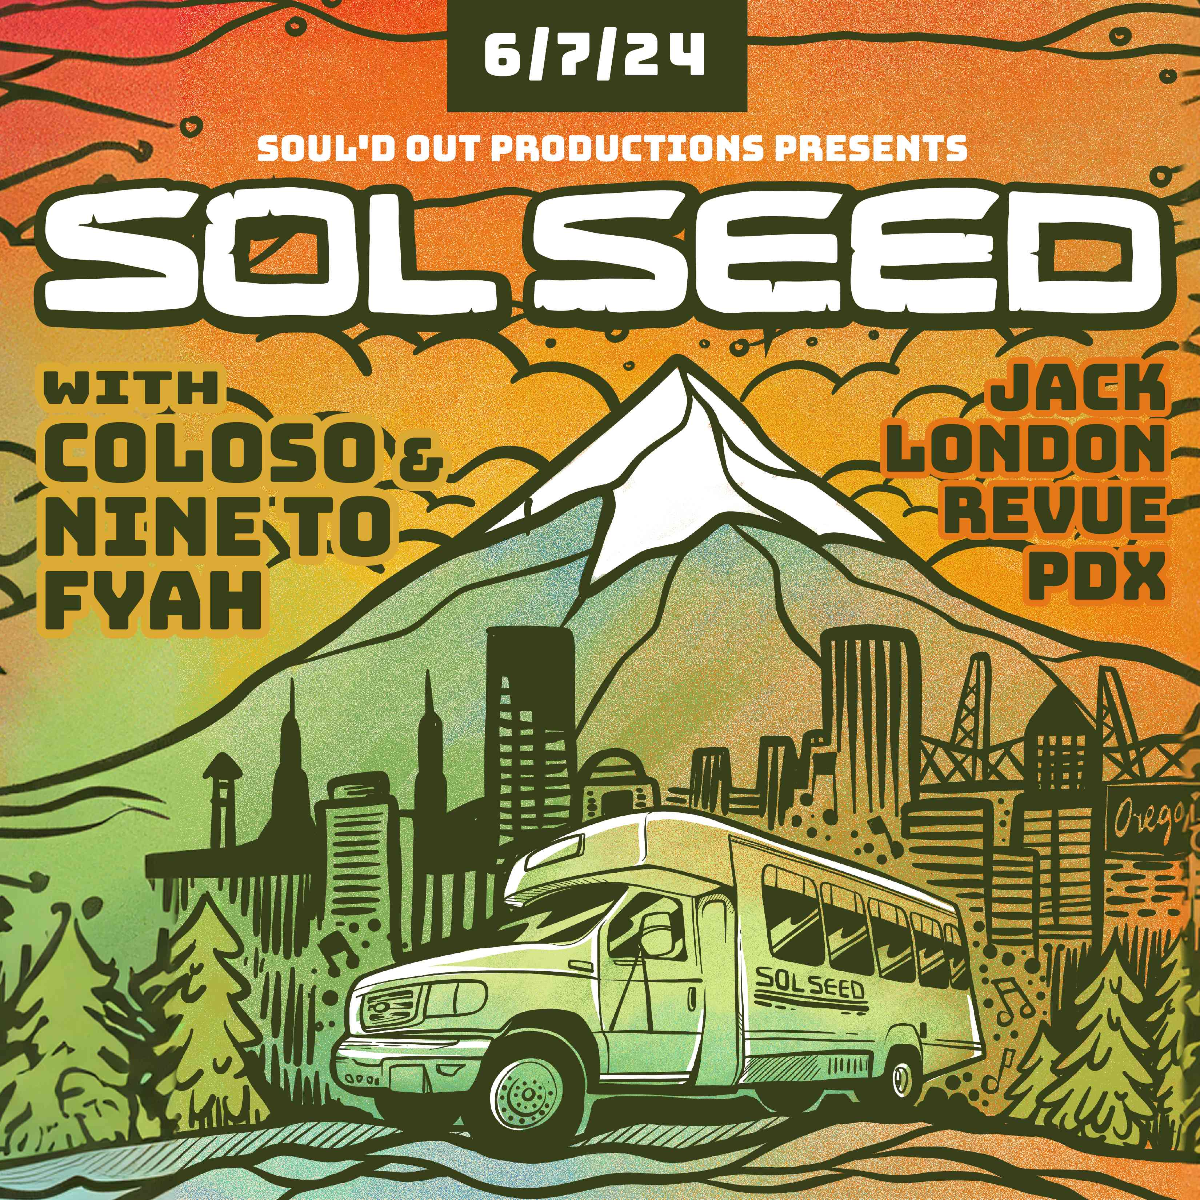 SOL SEED with COLOSO and NINE TO FYAH